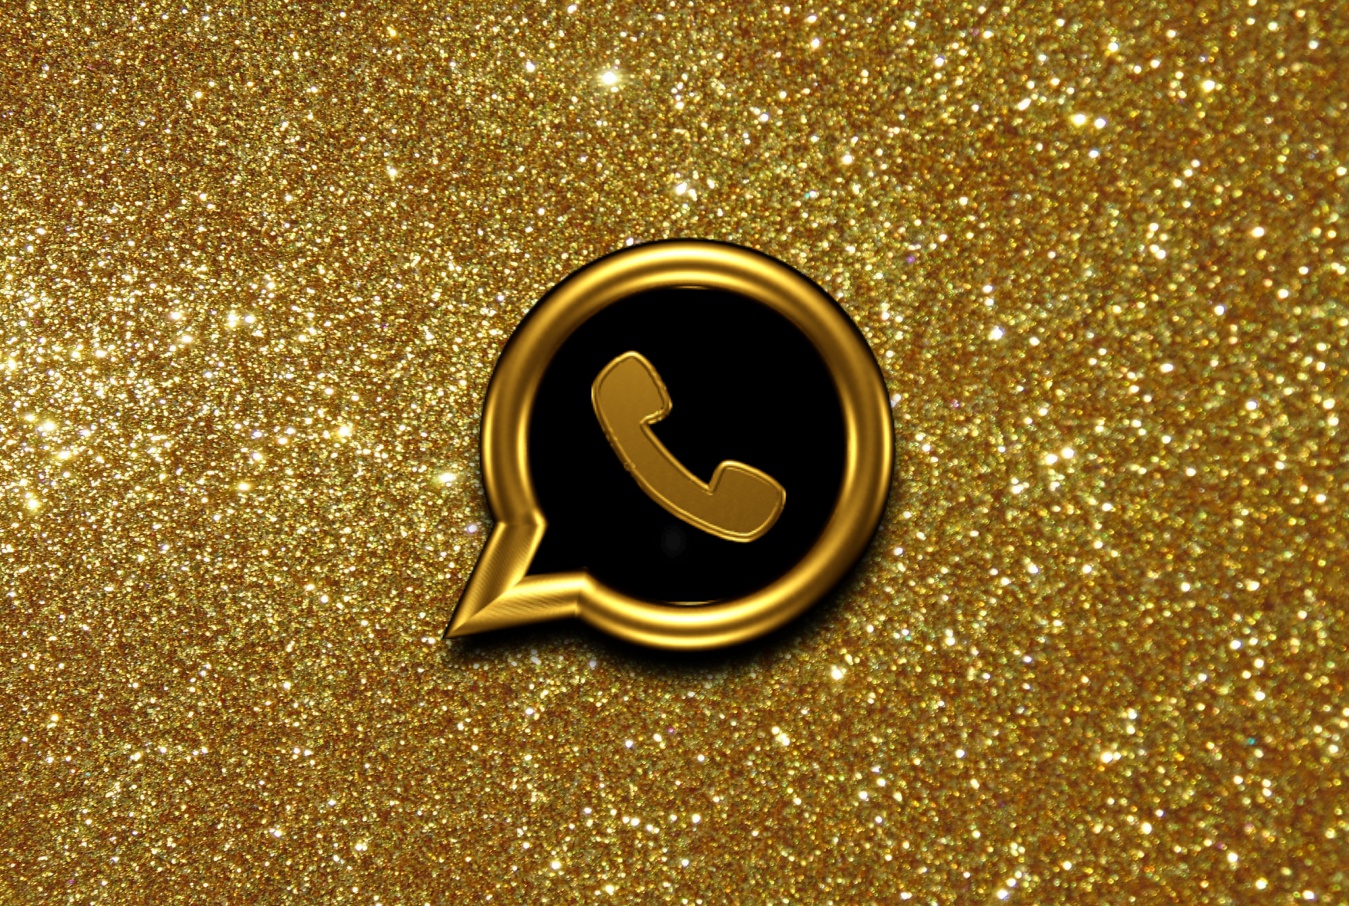 WhatsApp Gold Scam is Back with Malware Payload